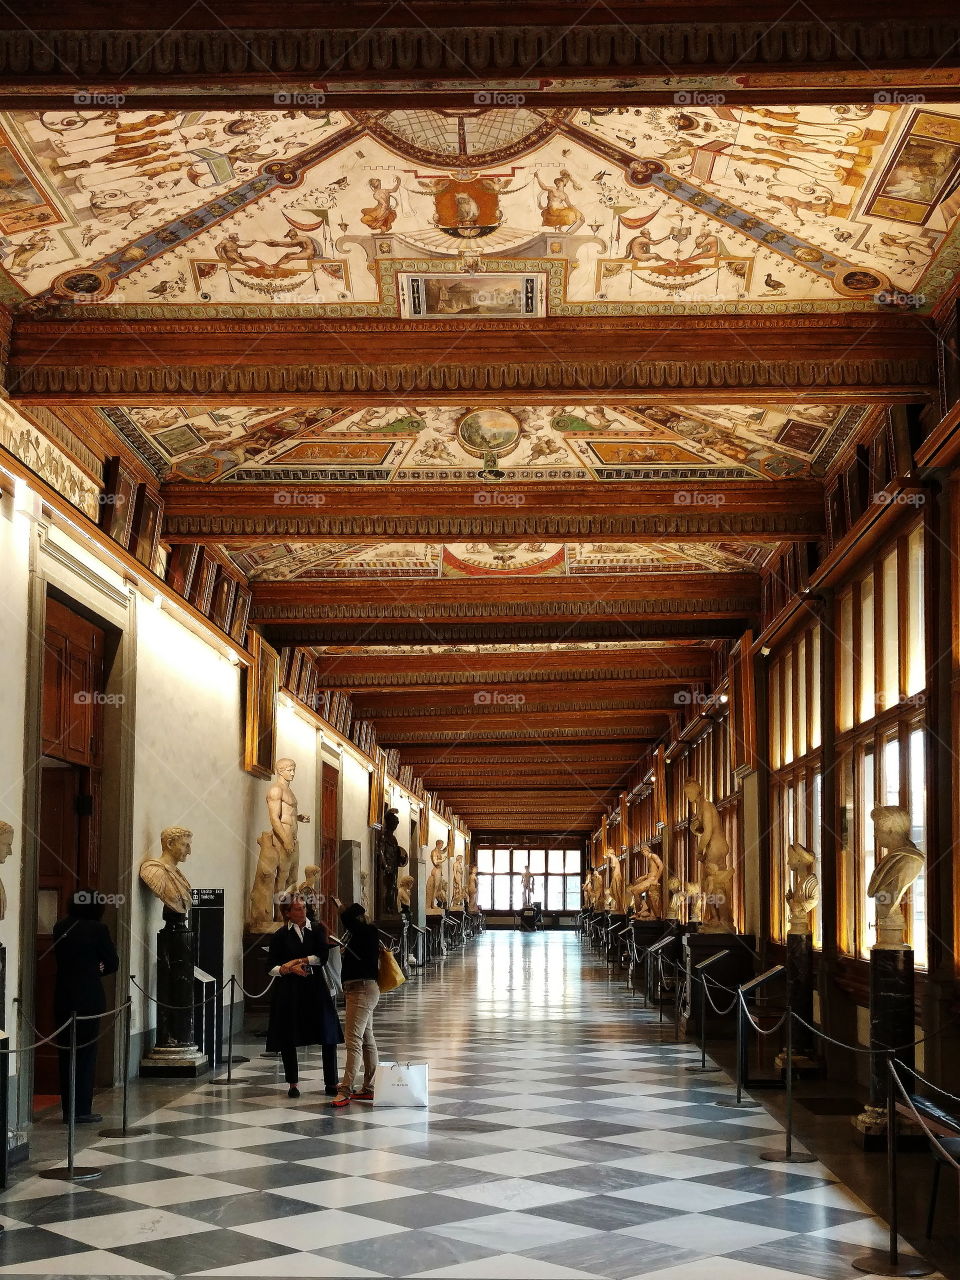 The Uffizi Gallery in Florence, Italy